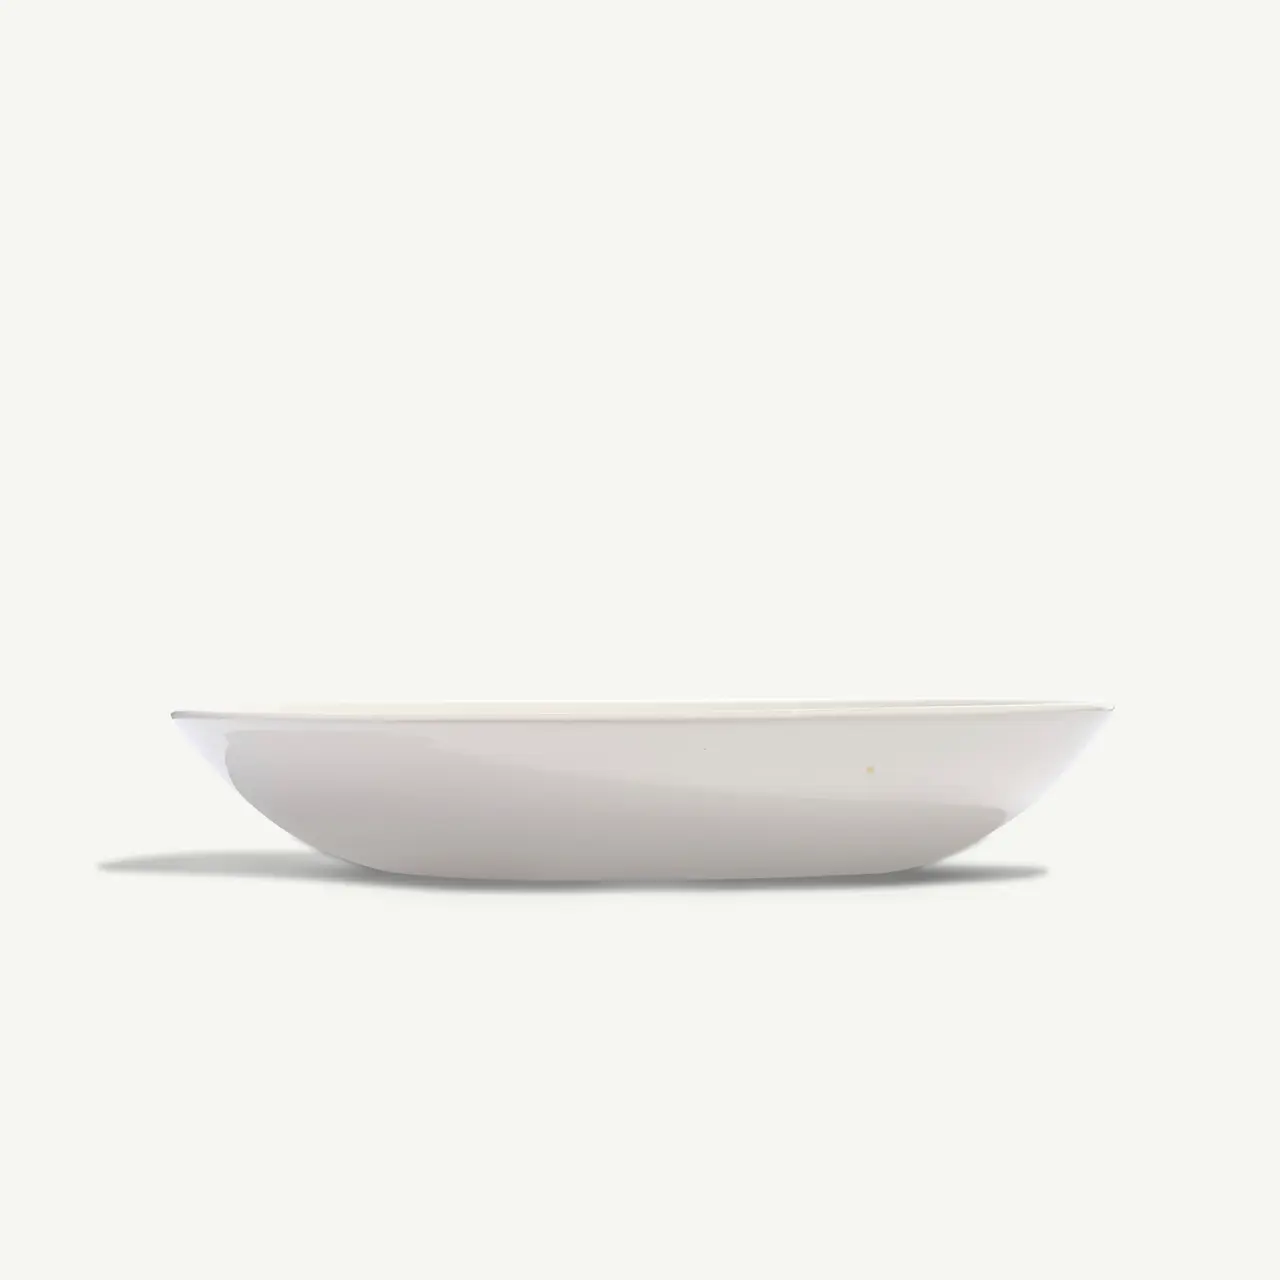 A plain white, shallow bowl is centered on a white background.